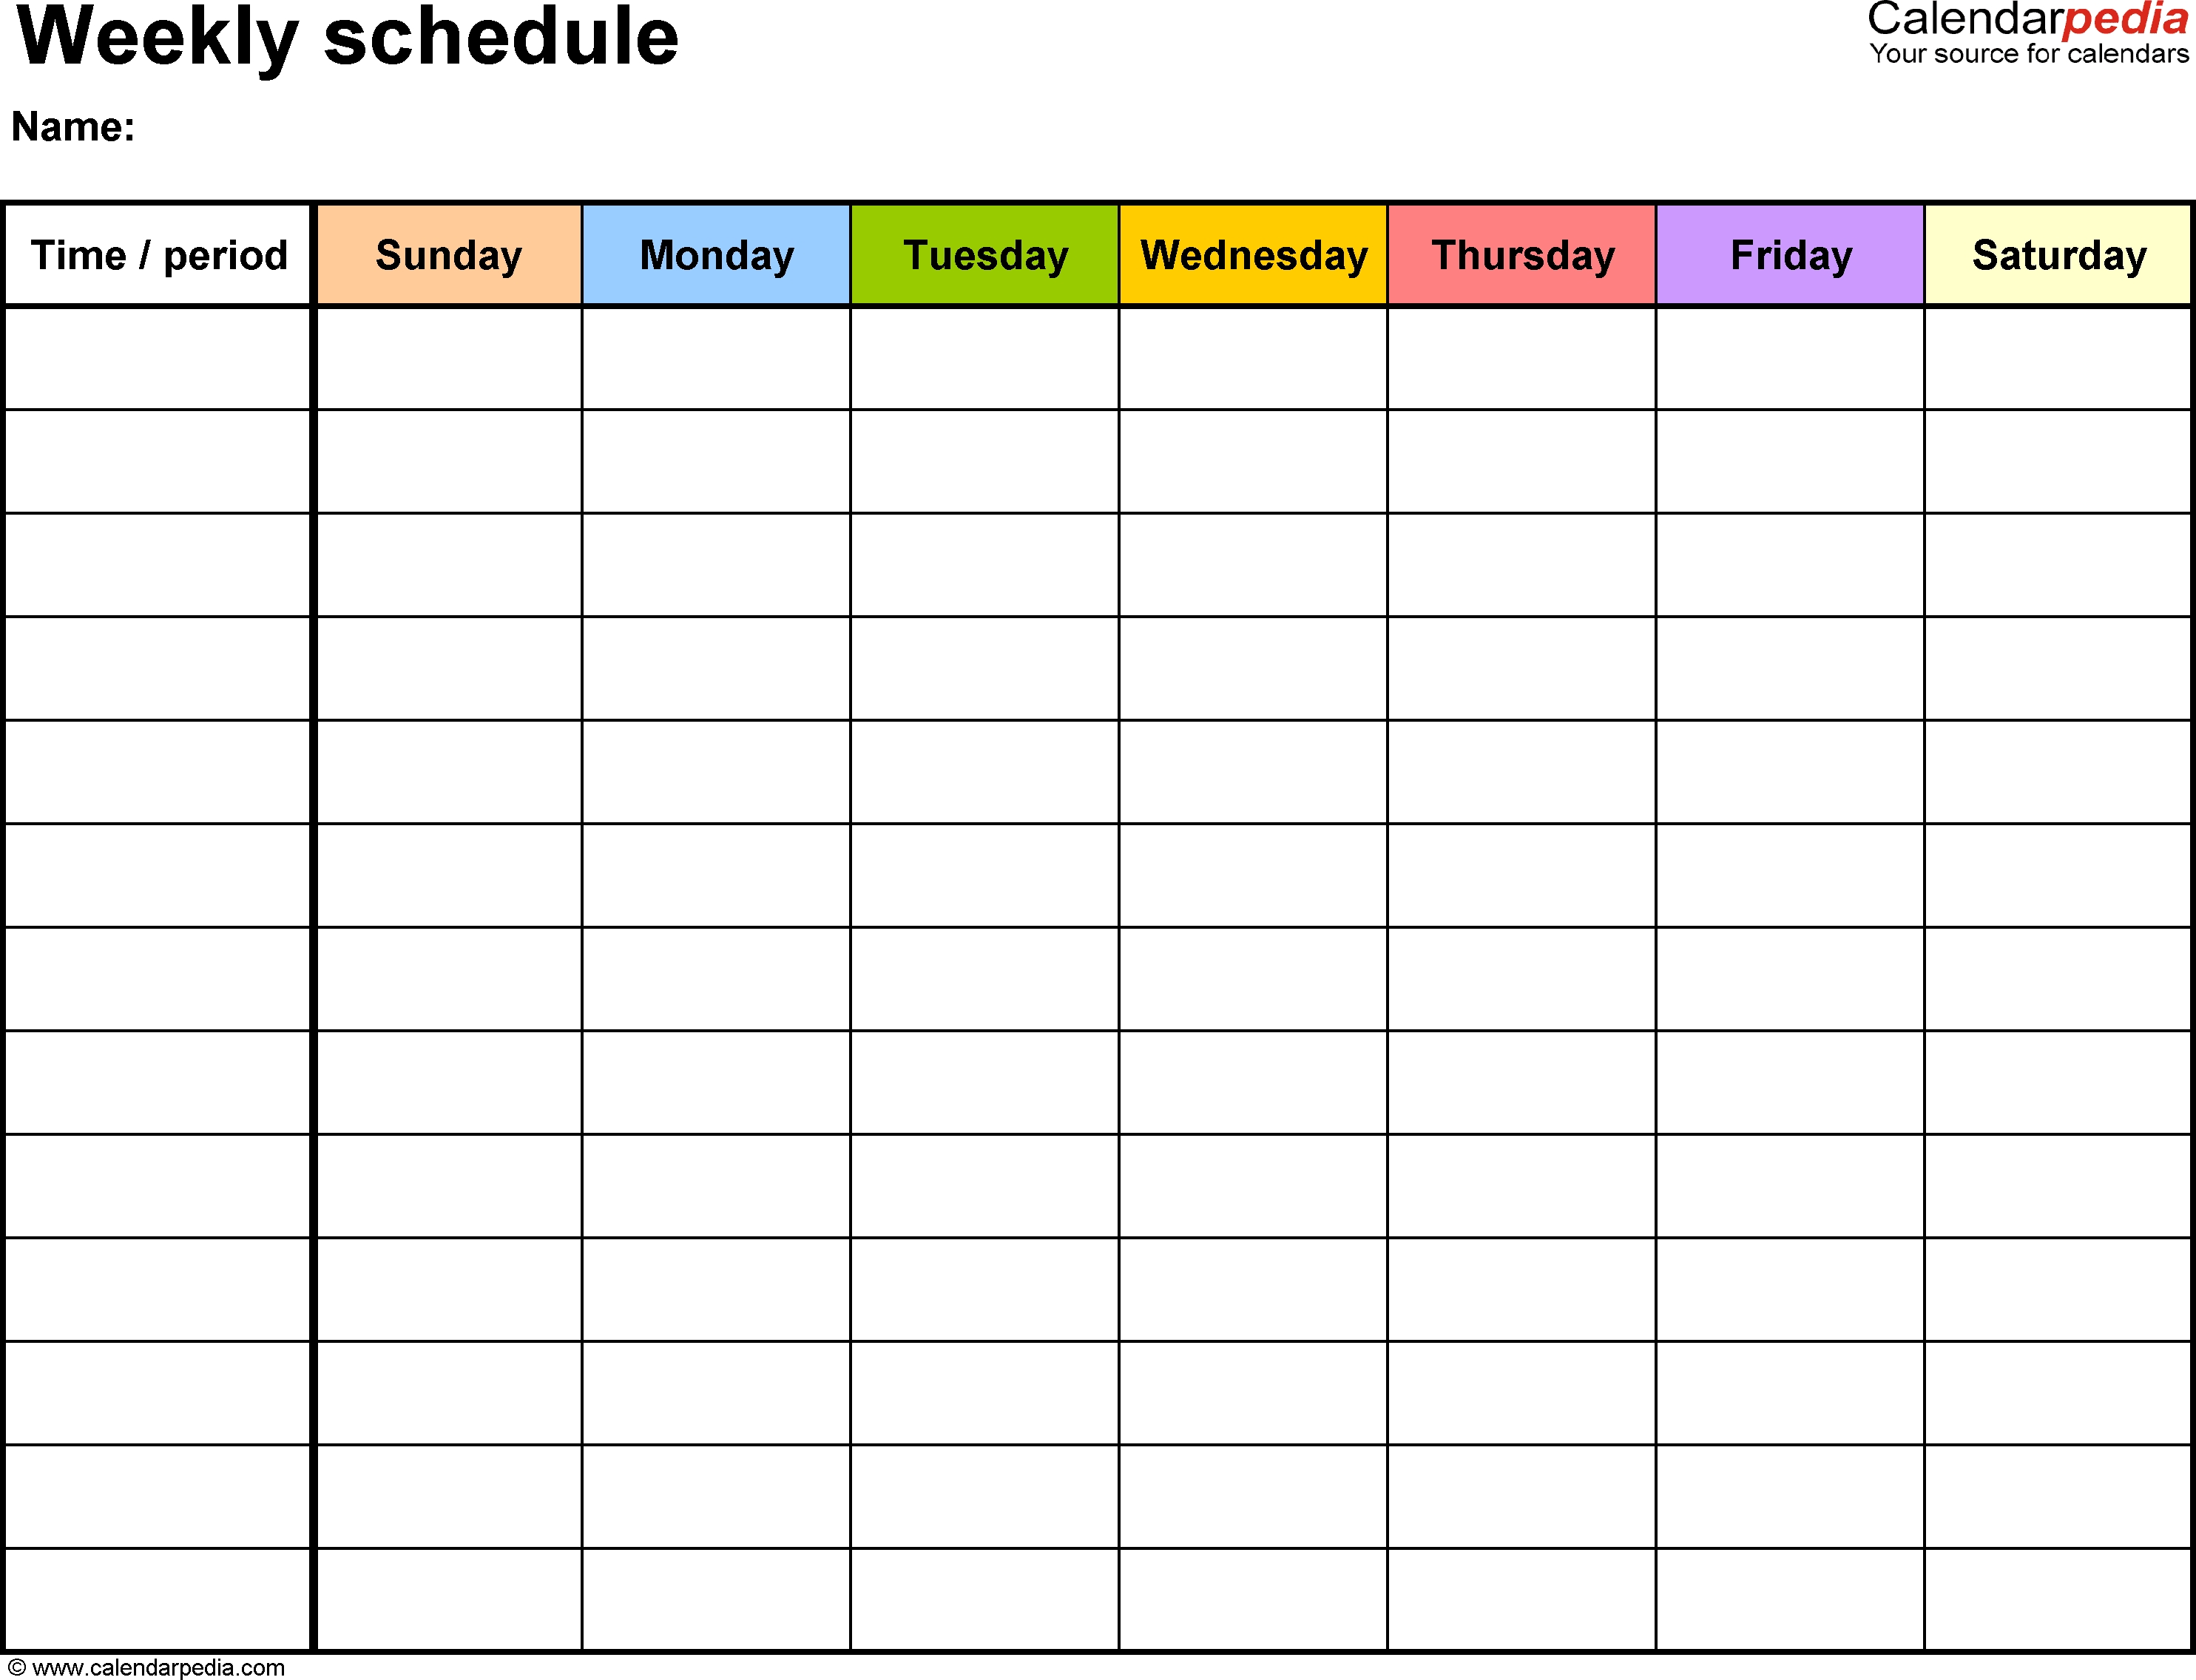 Free Weekly Schedule Templates For Excel - 18 Templates  6 Week Blank Schedule Template